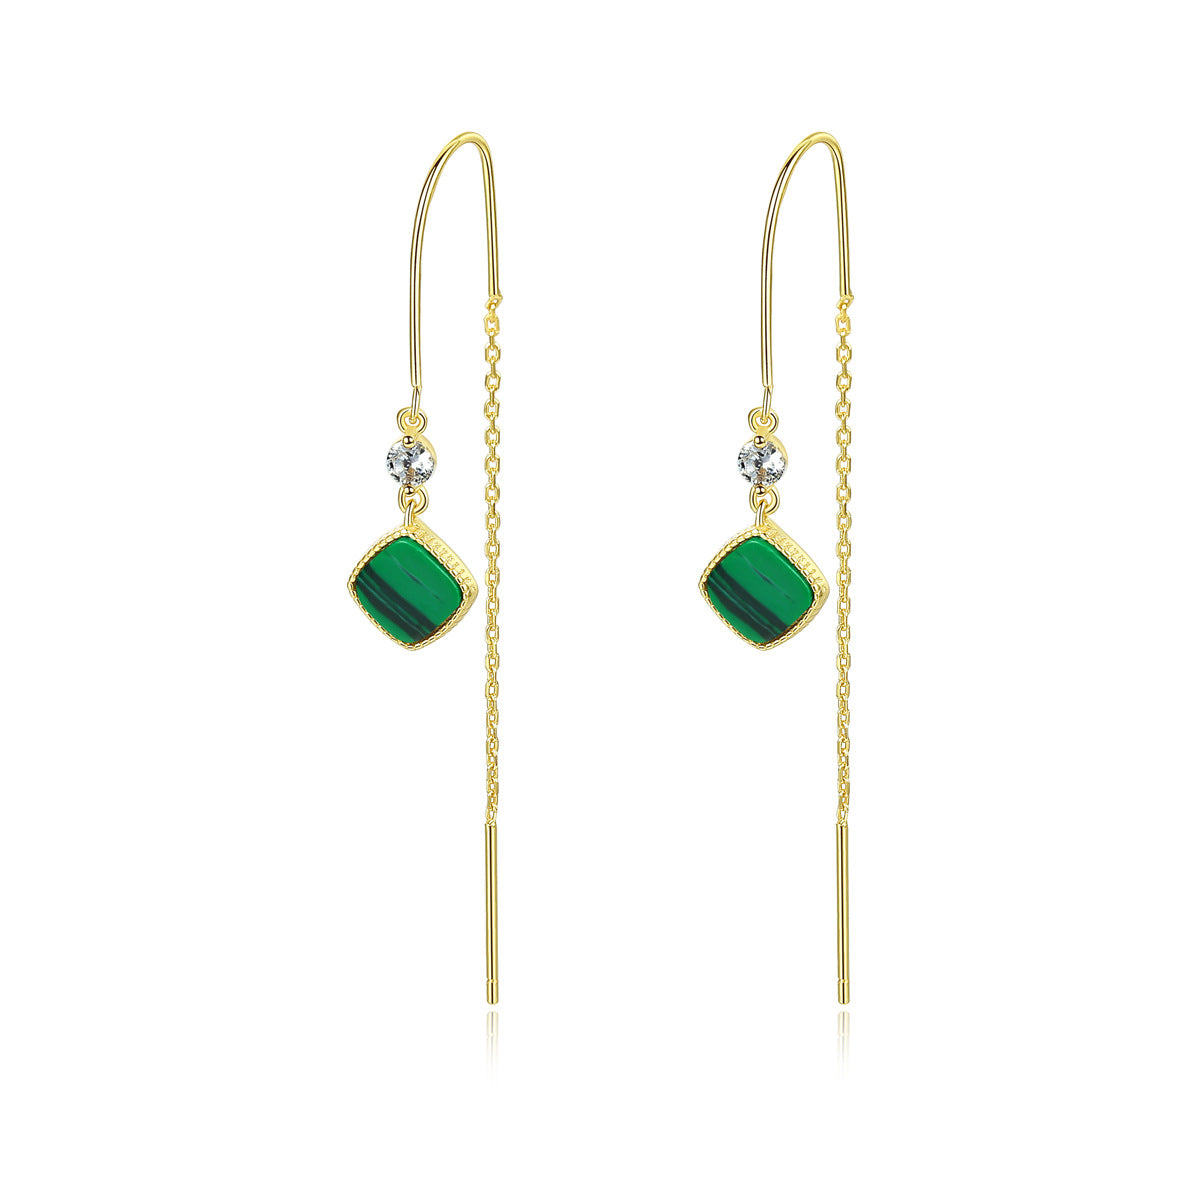 Yellow Gold Plated On 925 Sterling Silver Bella Drop Earrings